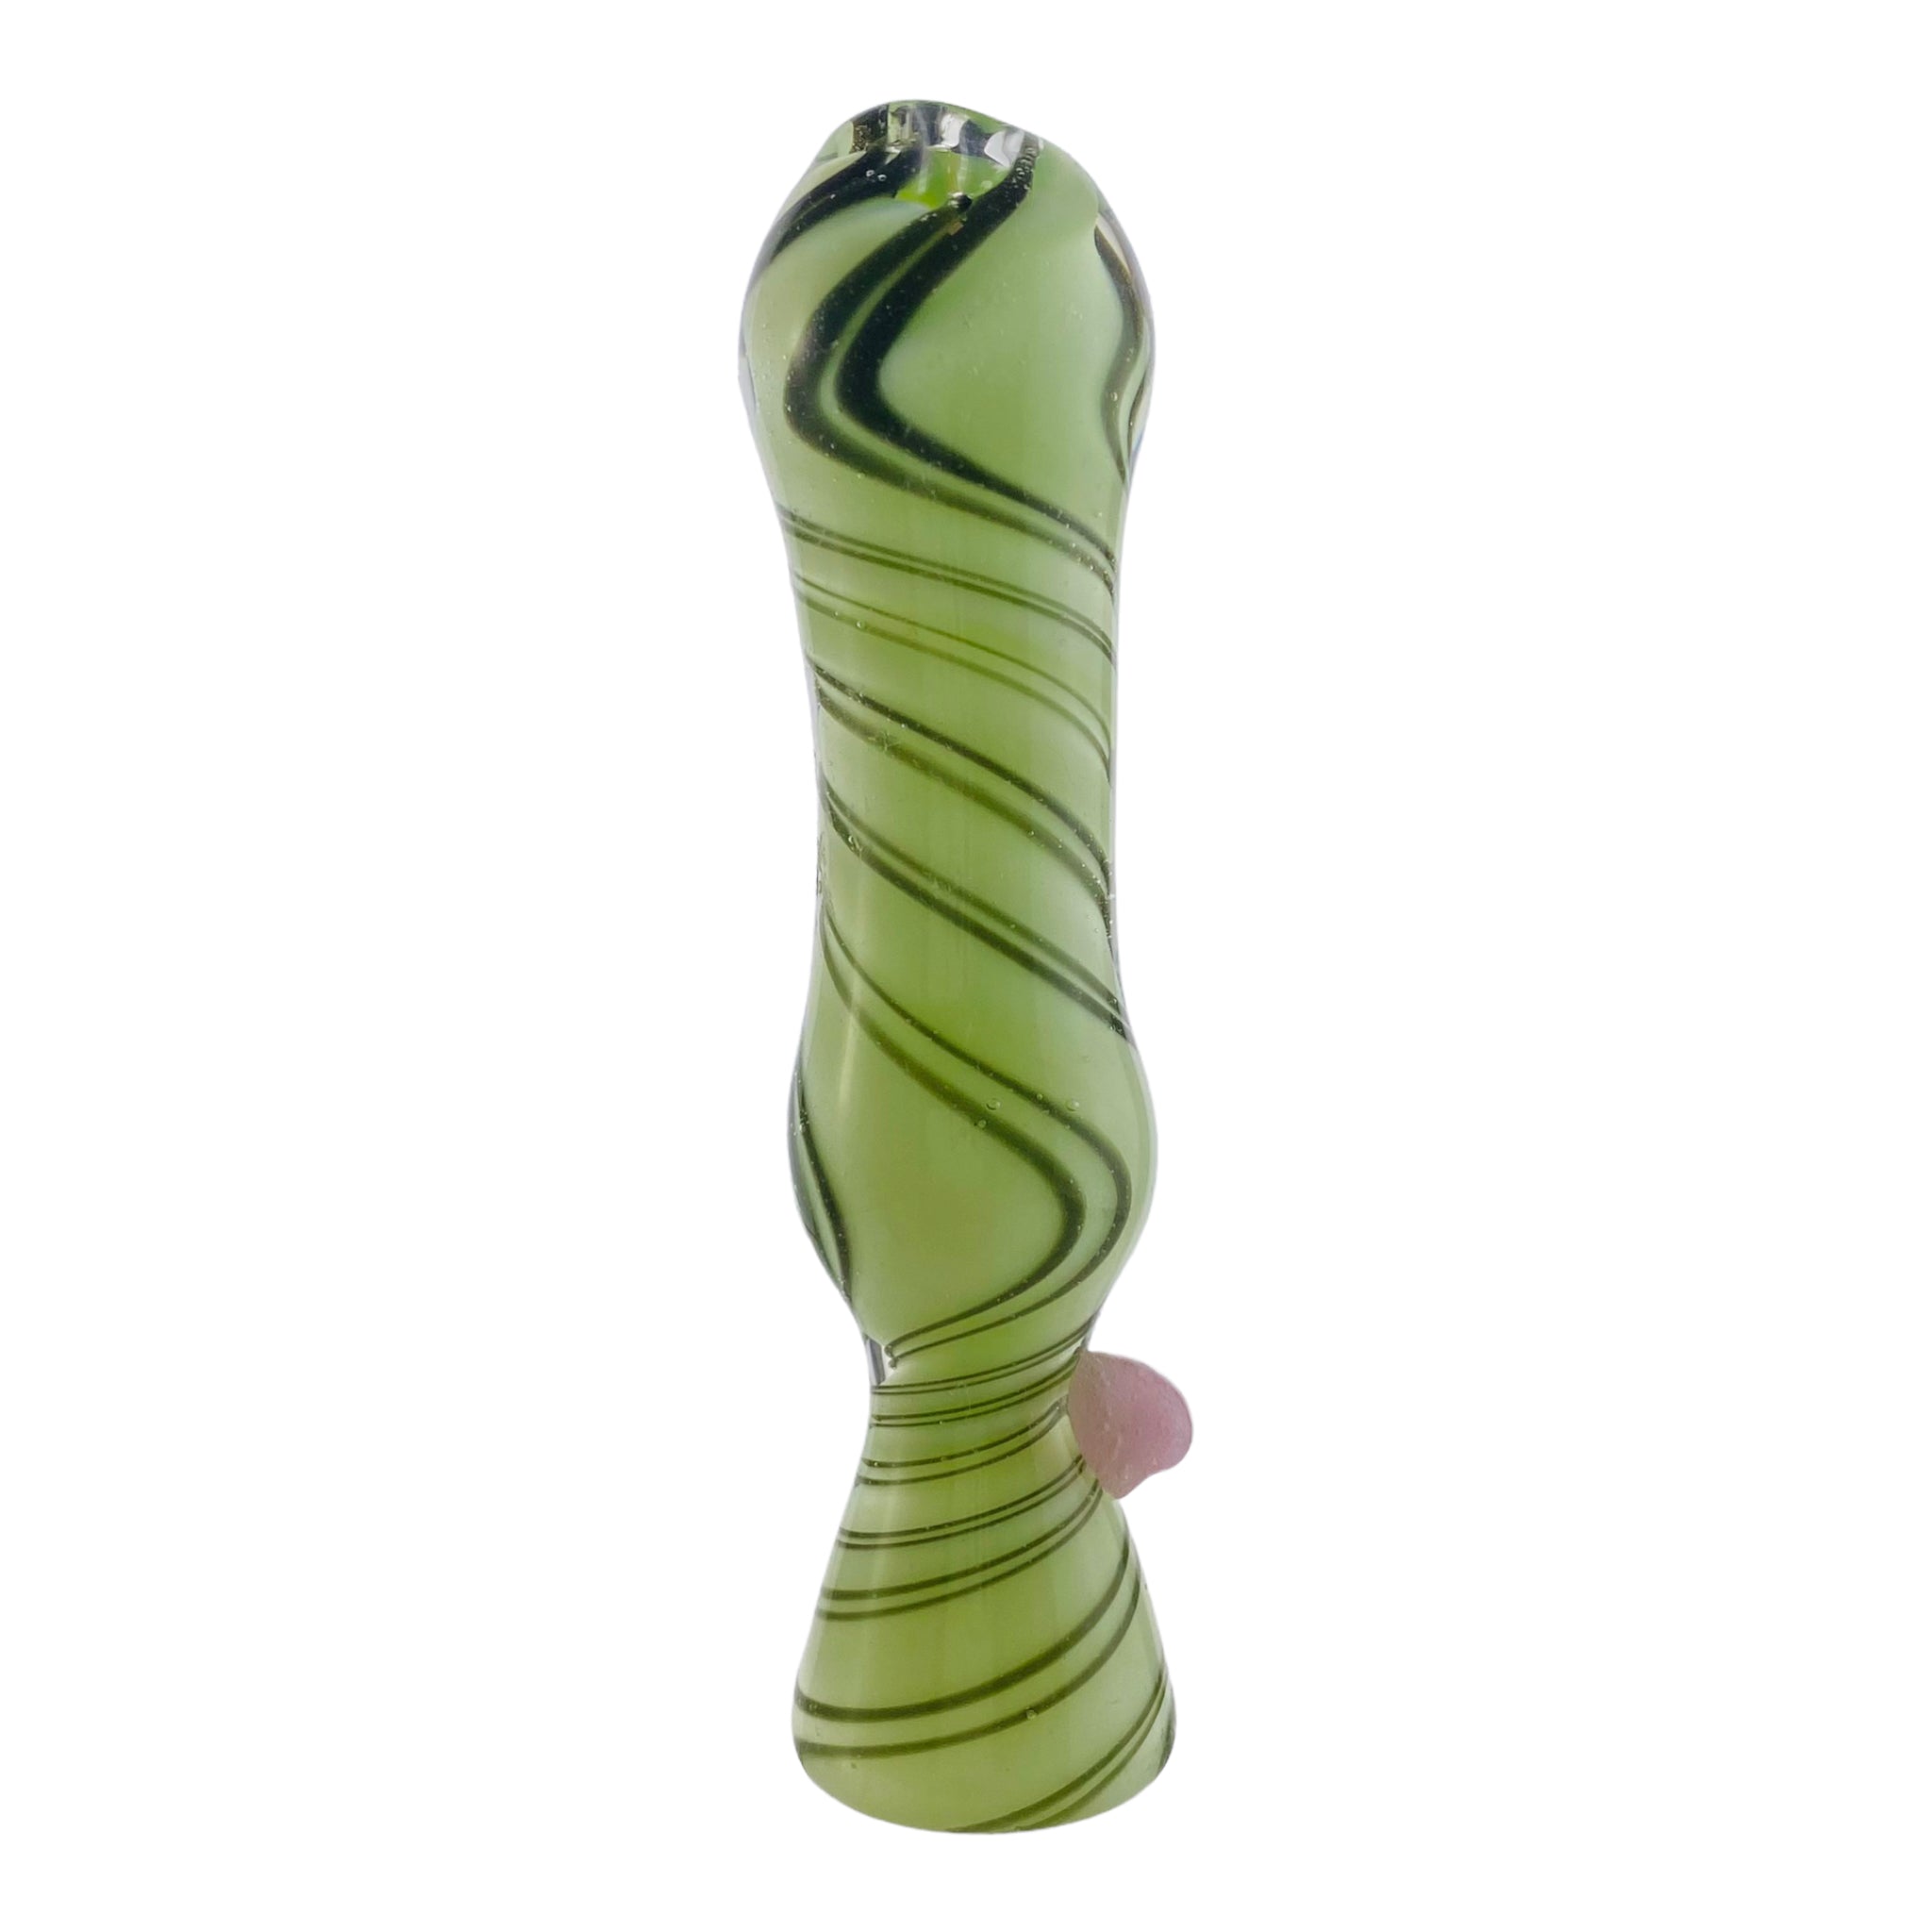 Glass Chillum Pipe - Green With Black Spirals And Pink Dot